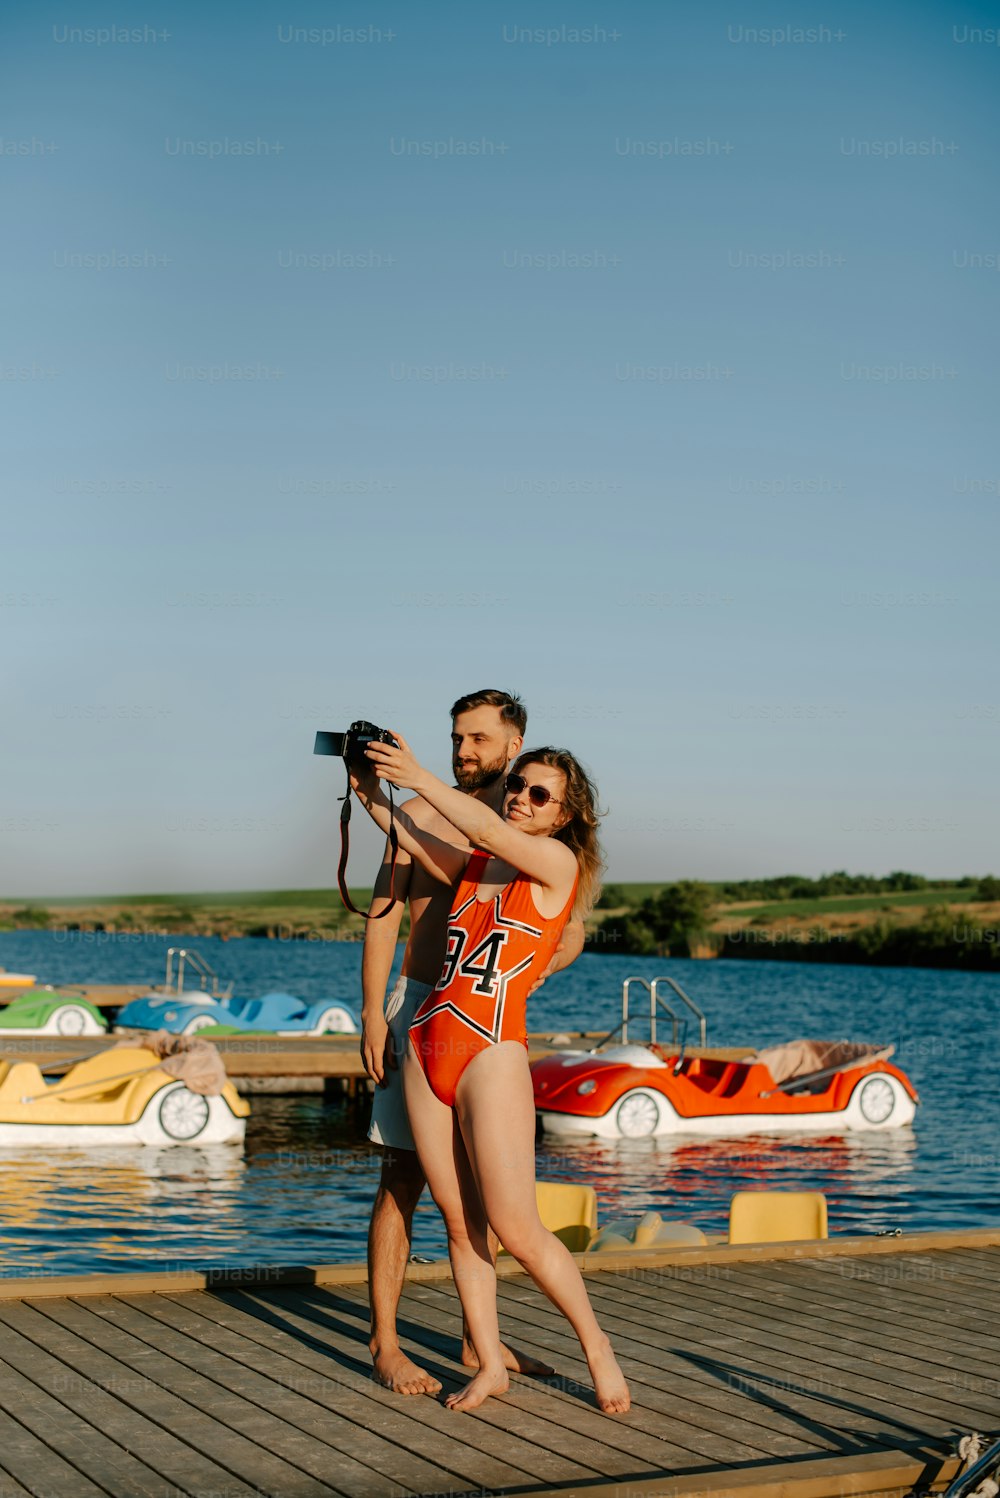 a man taking a picture of a woman in a bathing suit